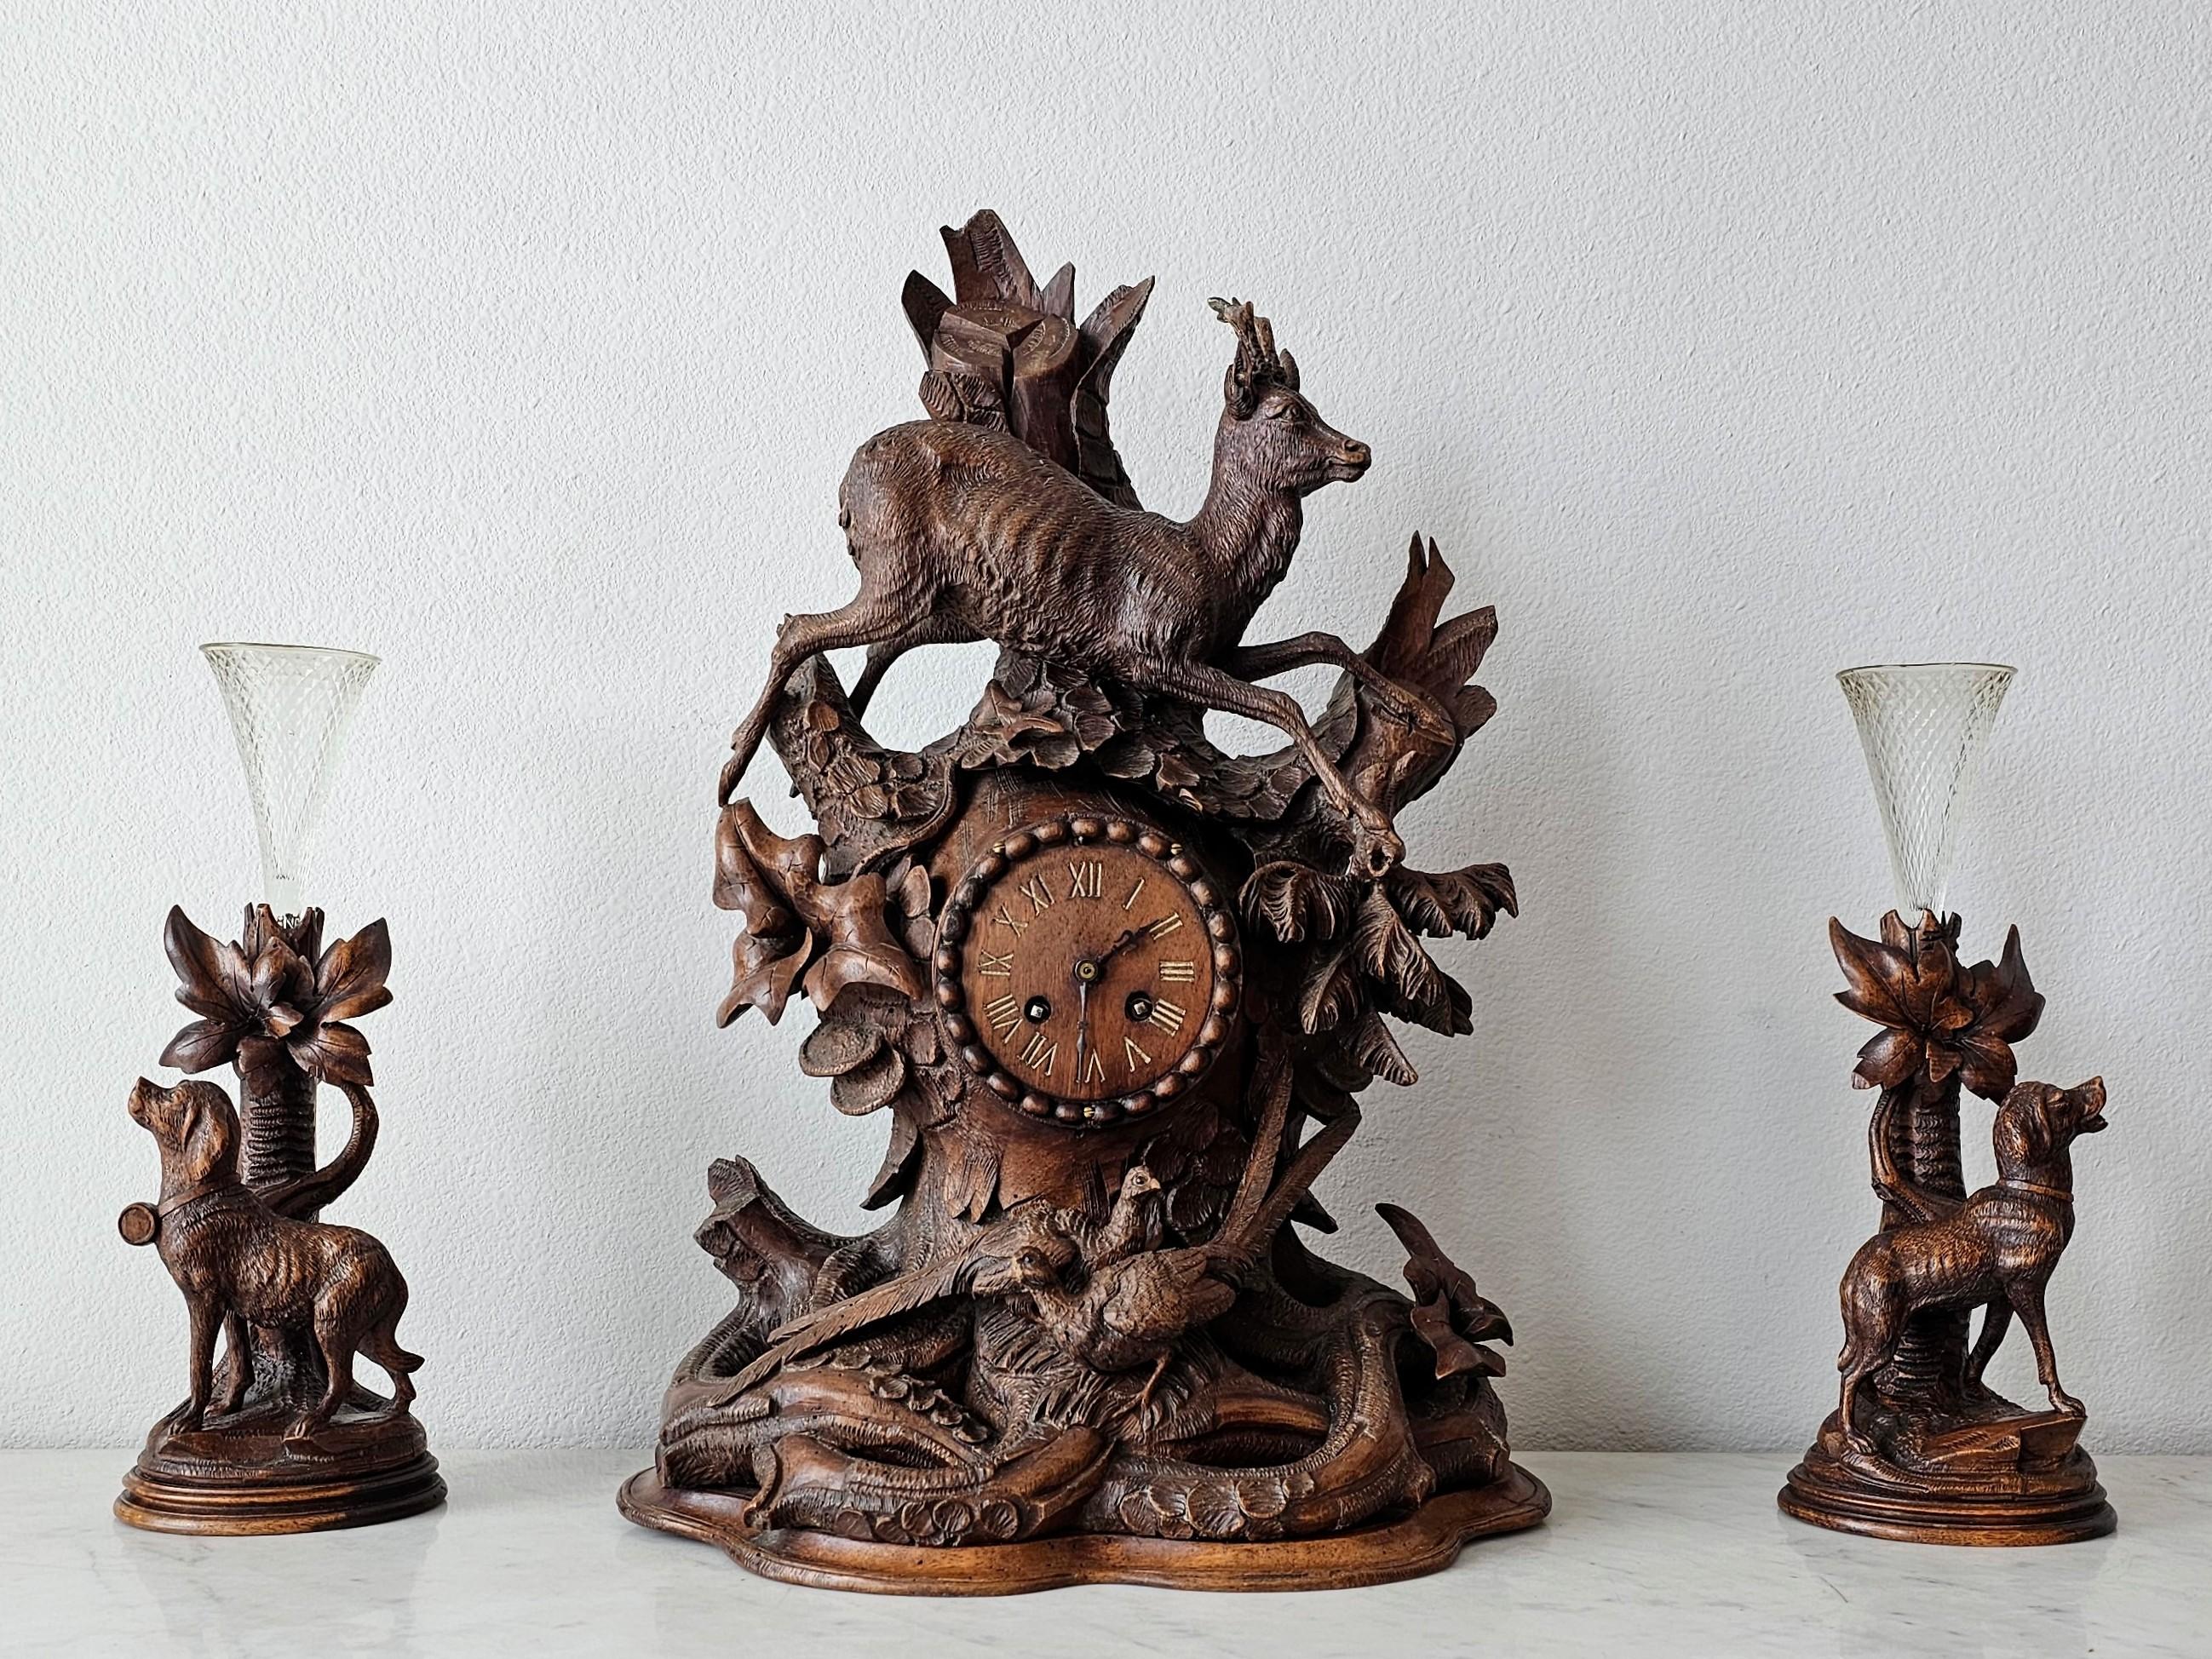 A magnificent antique Black Forest carved three piece mantel clock and garniture set. circa 1880

Swiss or German, late 19th century, a truly extraordinary work of art, exceptionally executed, intricately sculpted and finely detailed throughout,